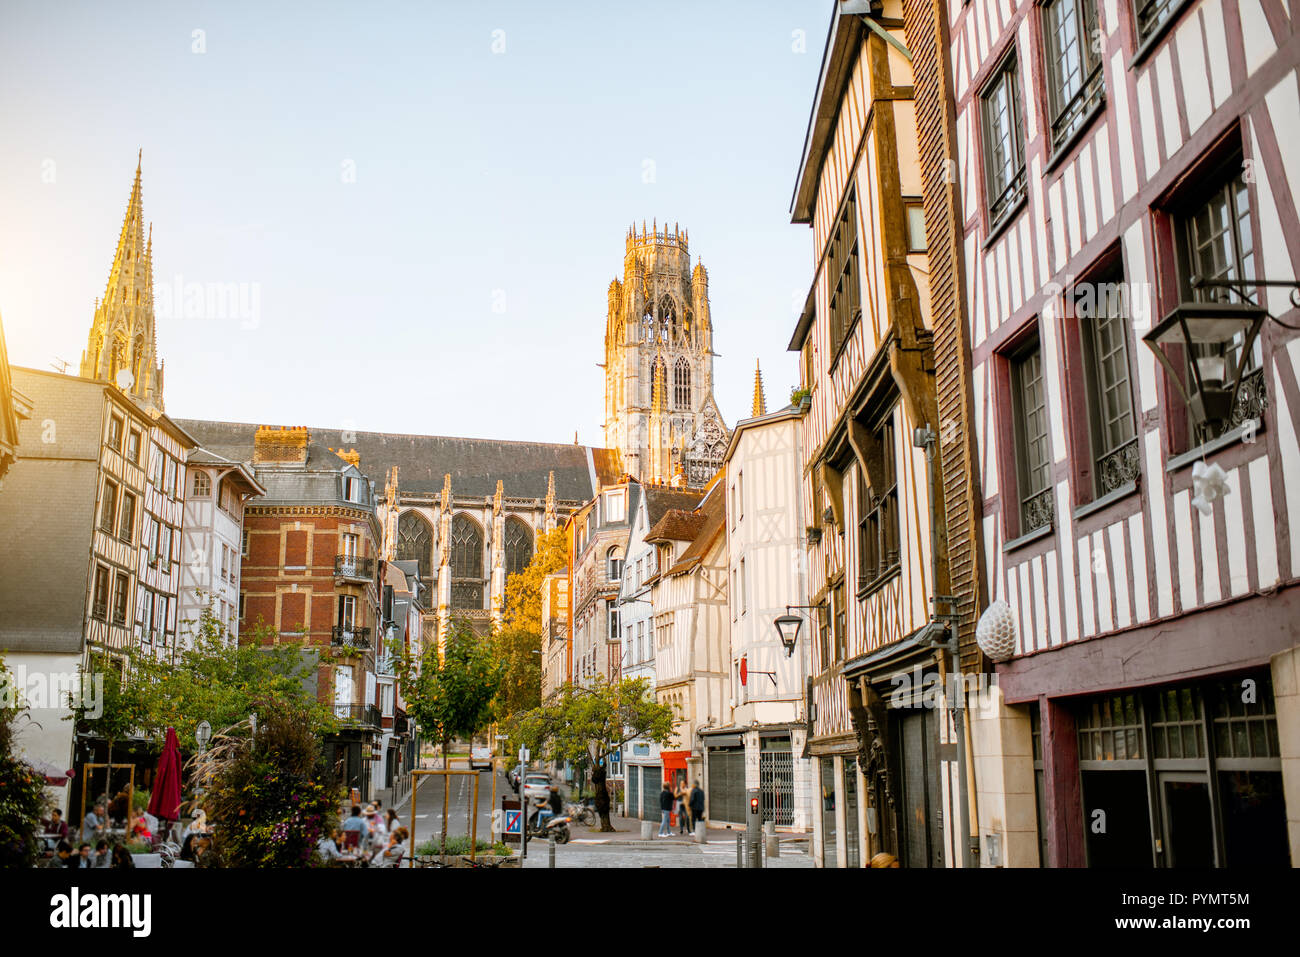 Street view with beautiful old buildings and cathedral tower on the ...